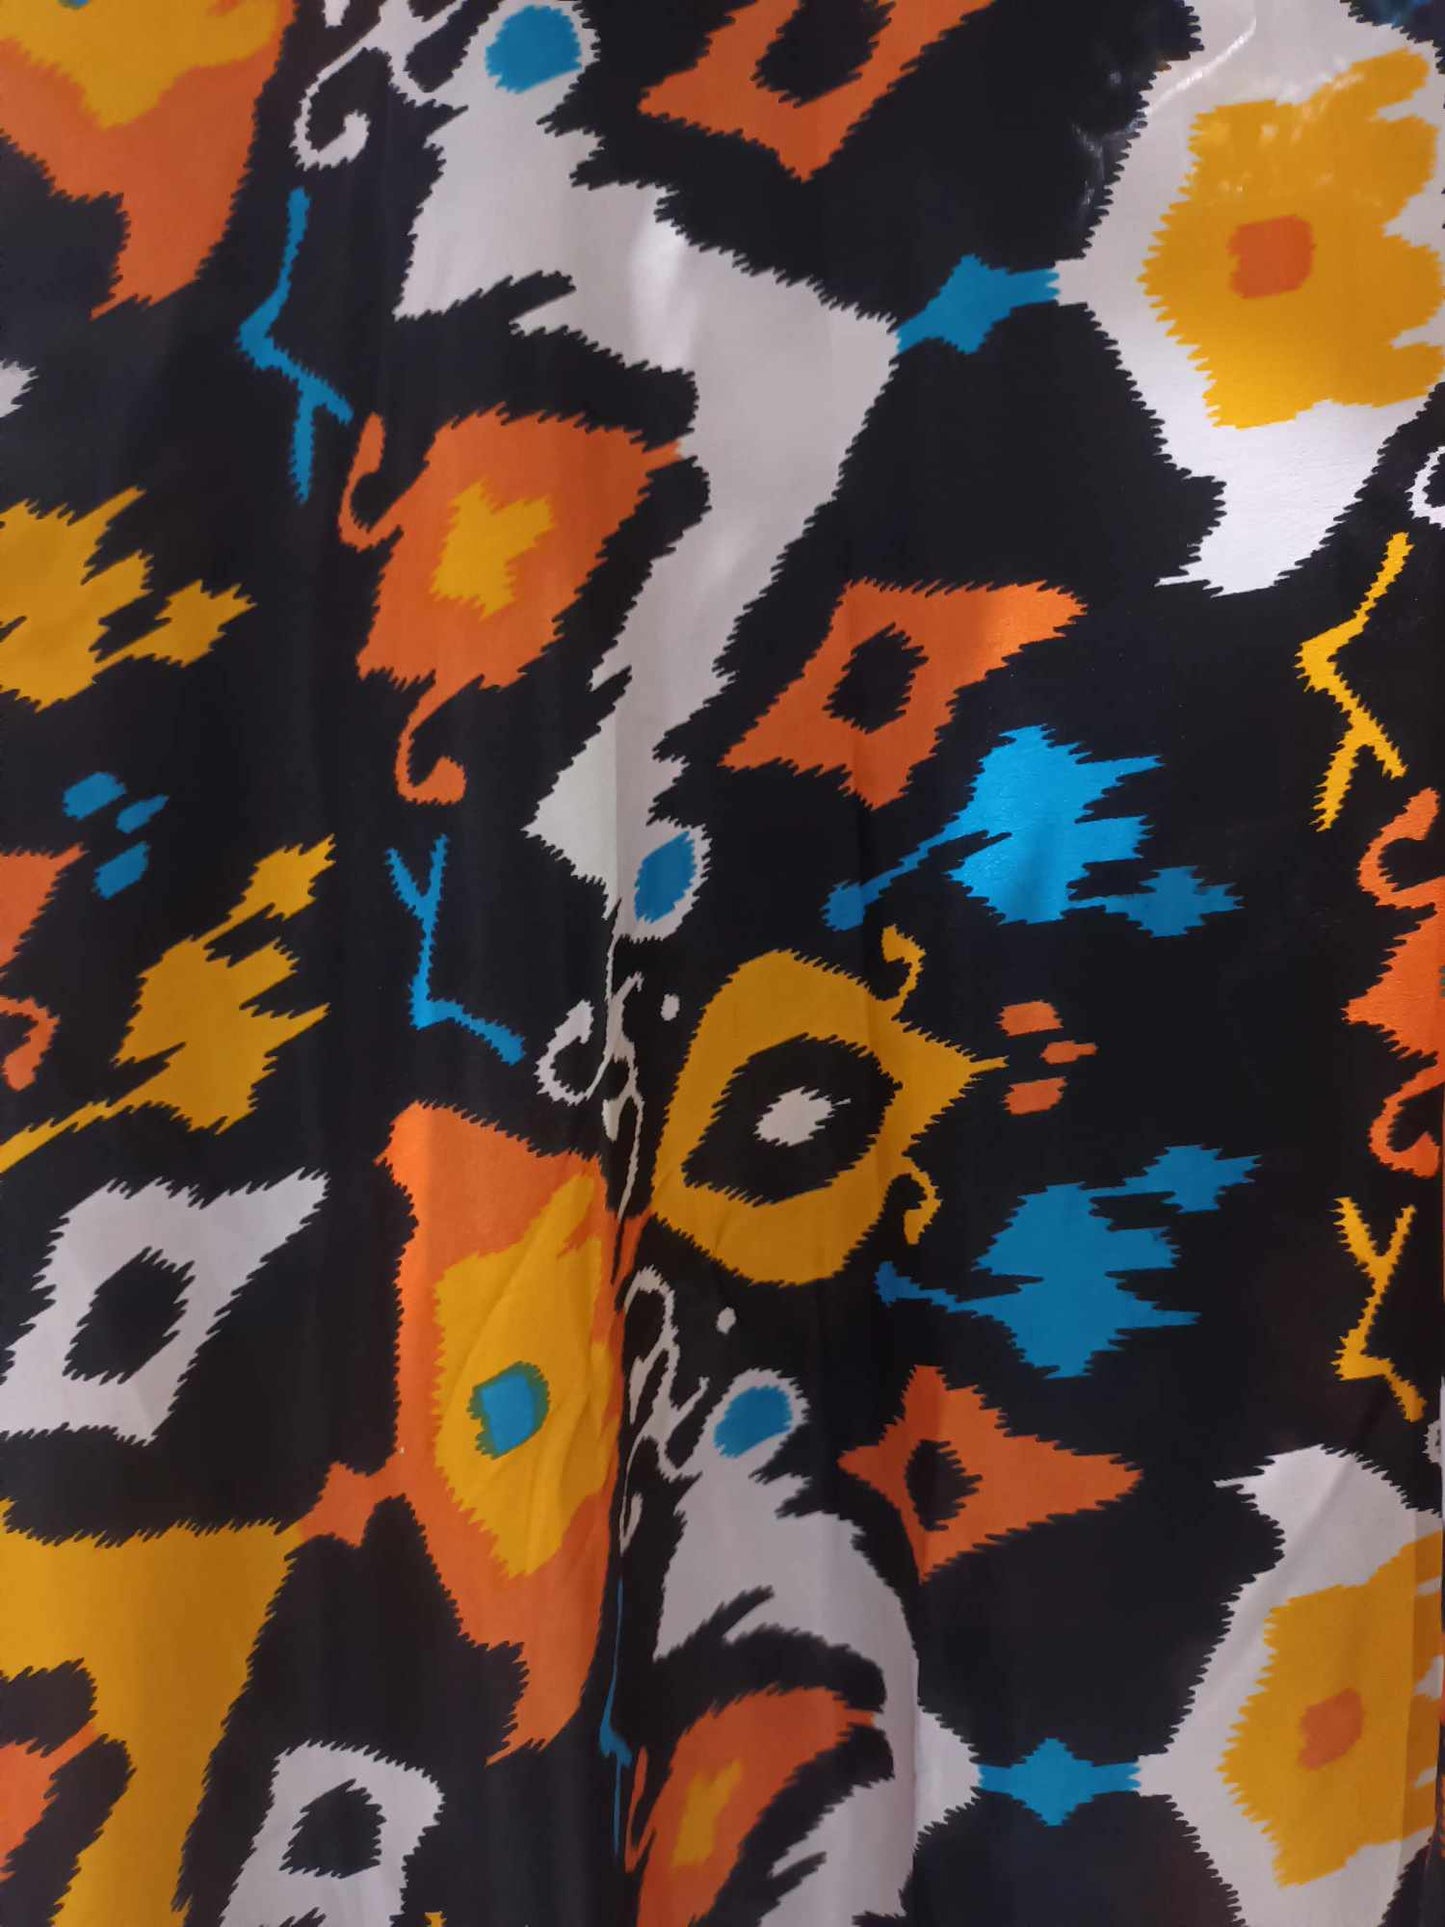 'FIESTA SPICE' BEAUTIFUL FULL CIRCLE ALLSORTS PRINT SKIRT FROM OUR EXCLUSIVE SPANISH COLLECTION